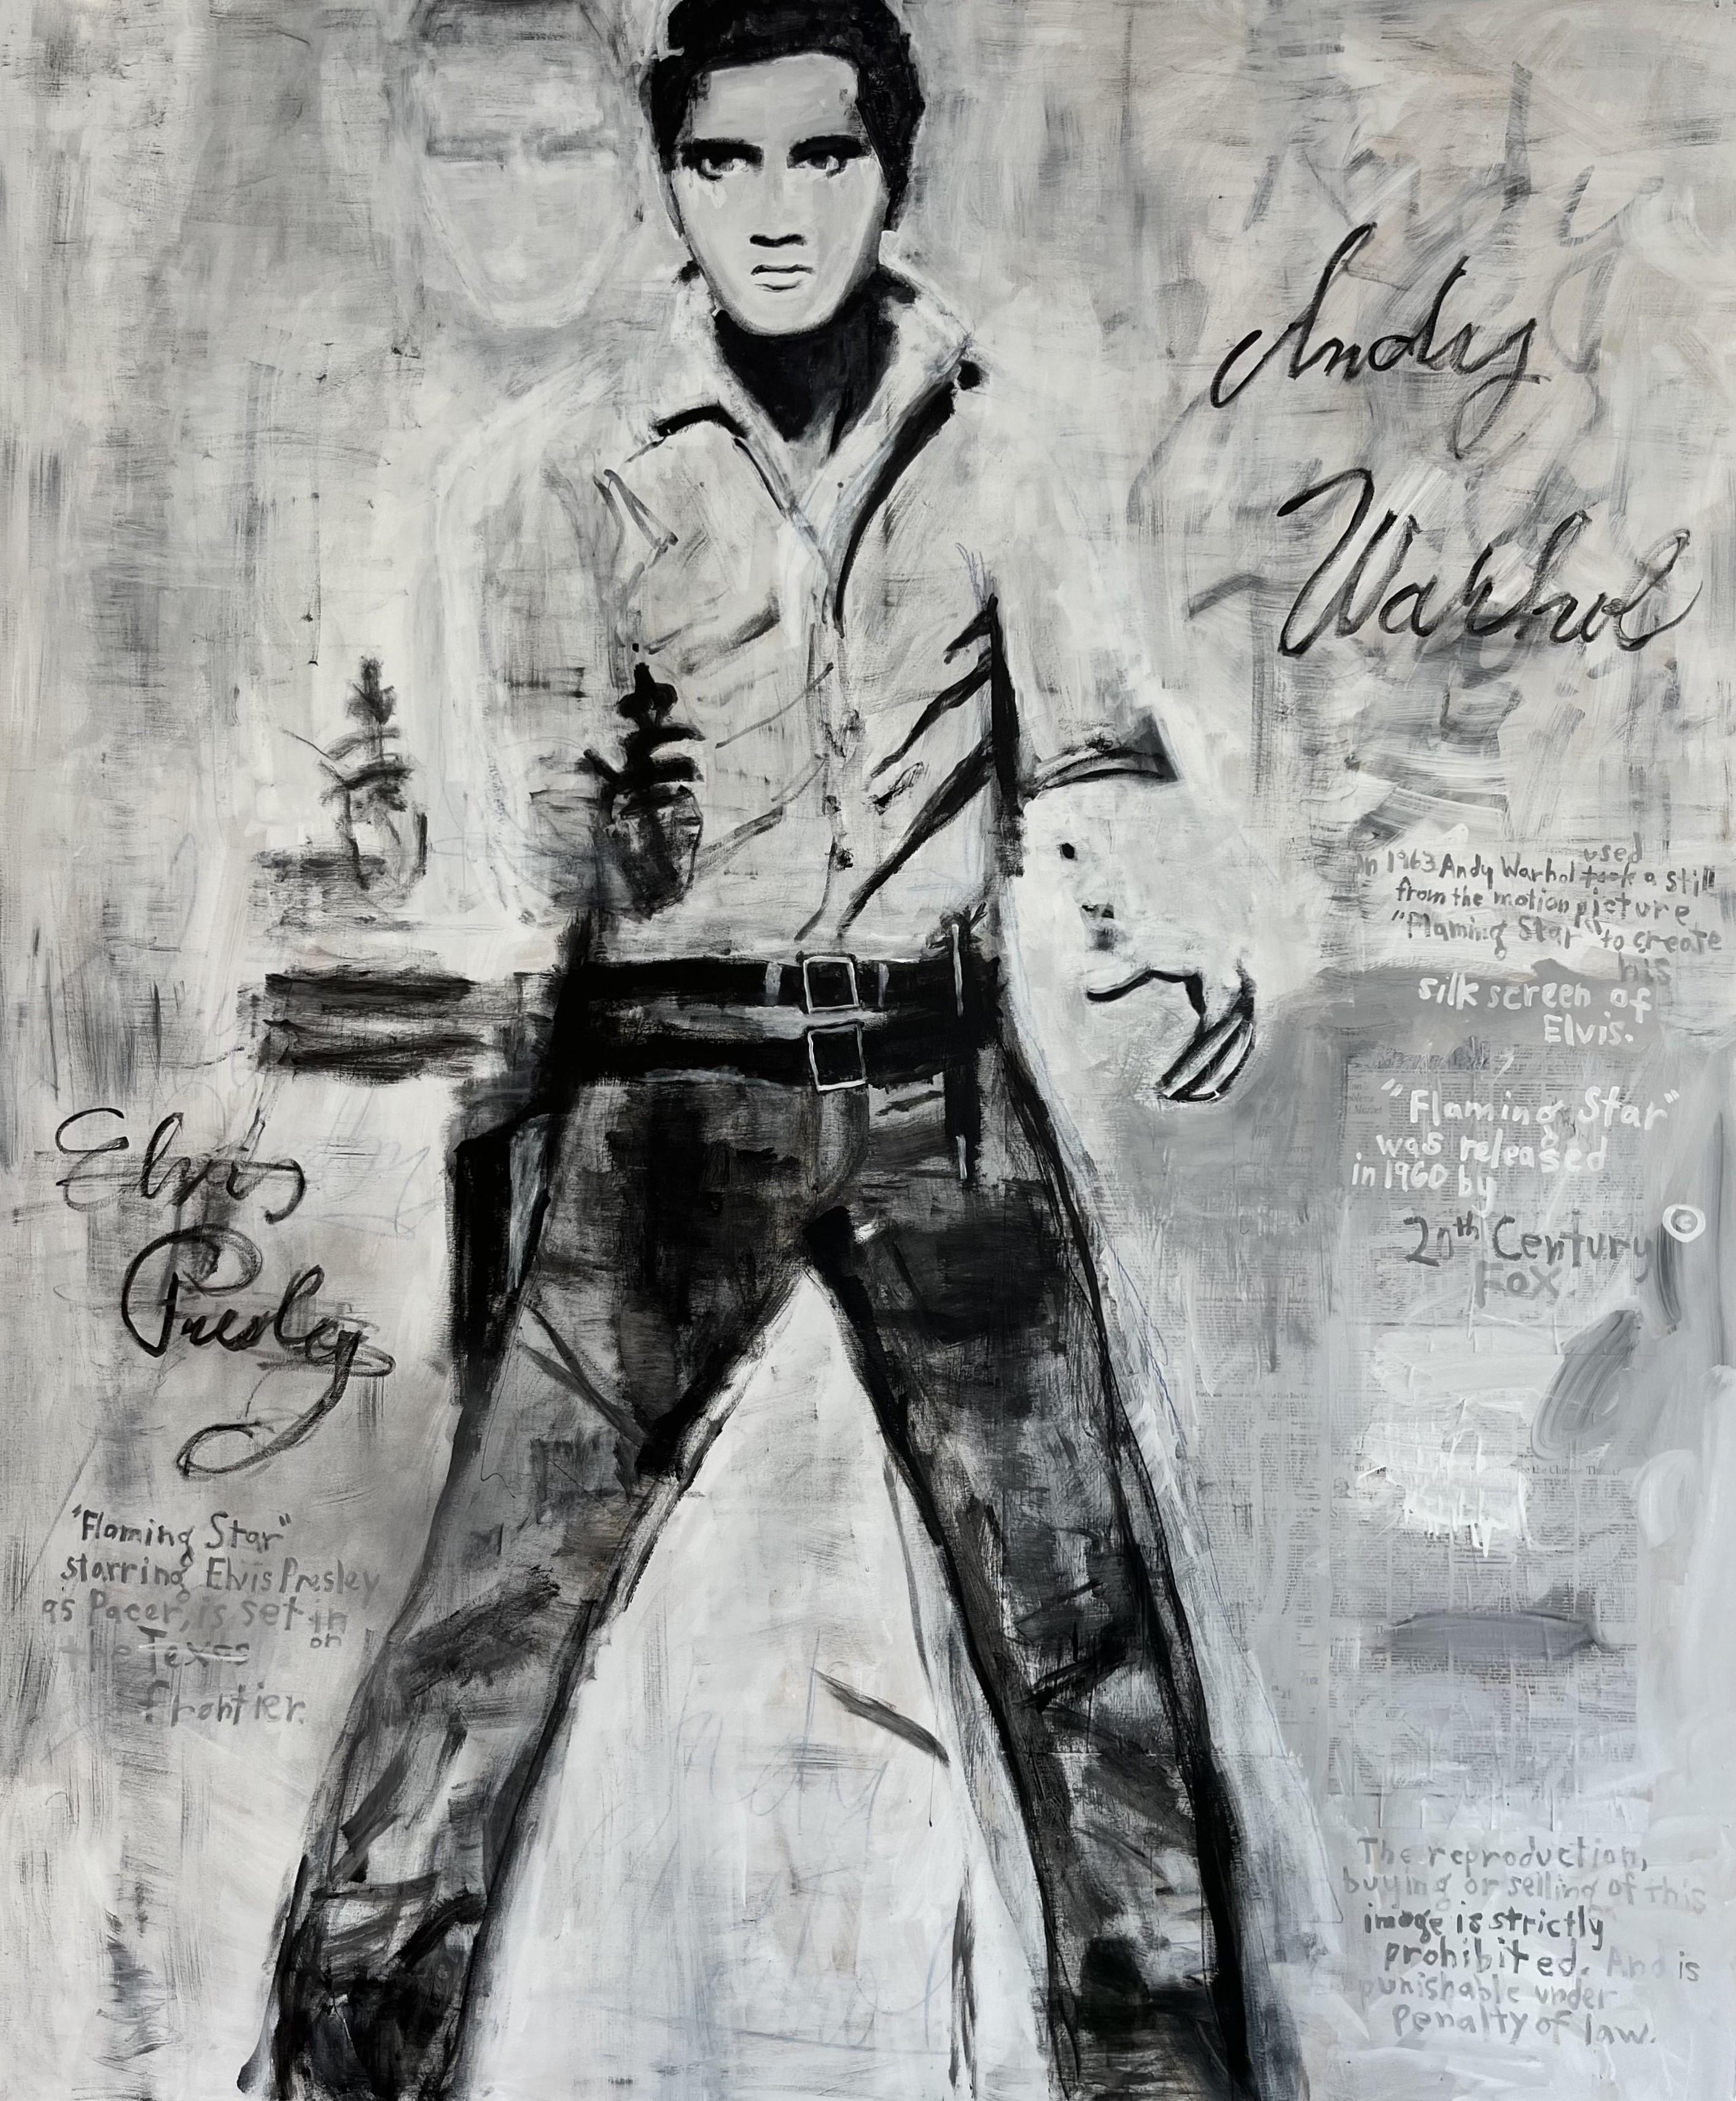 Tyler Casey Portrait Painting - "Elvis" Contemporary Abstract Black/White Andy Warhol Inspired Pop Art Painting